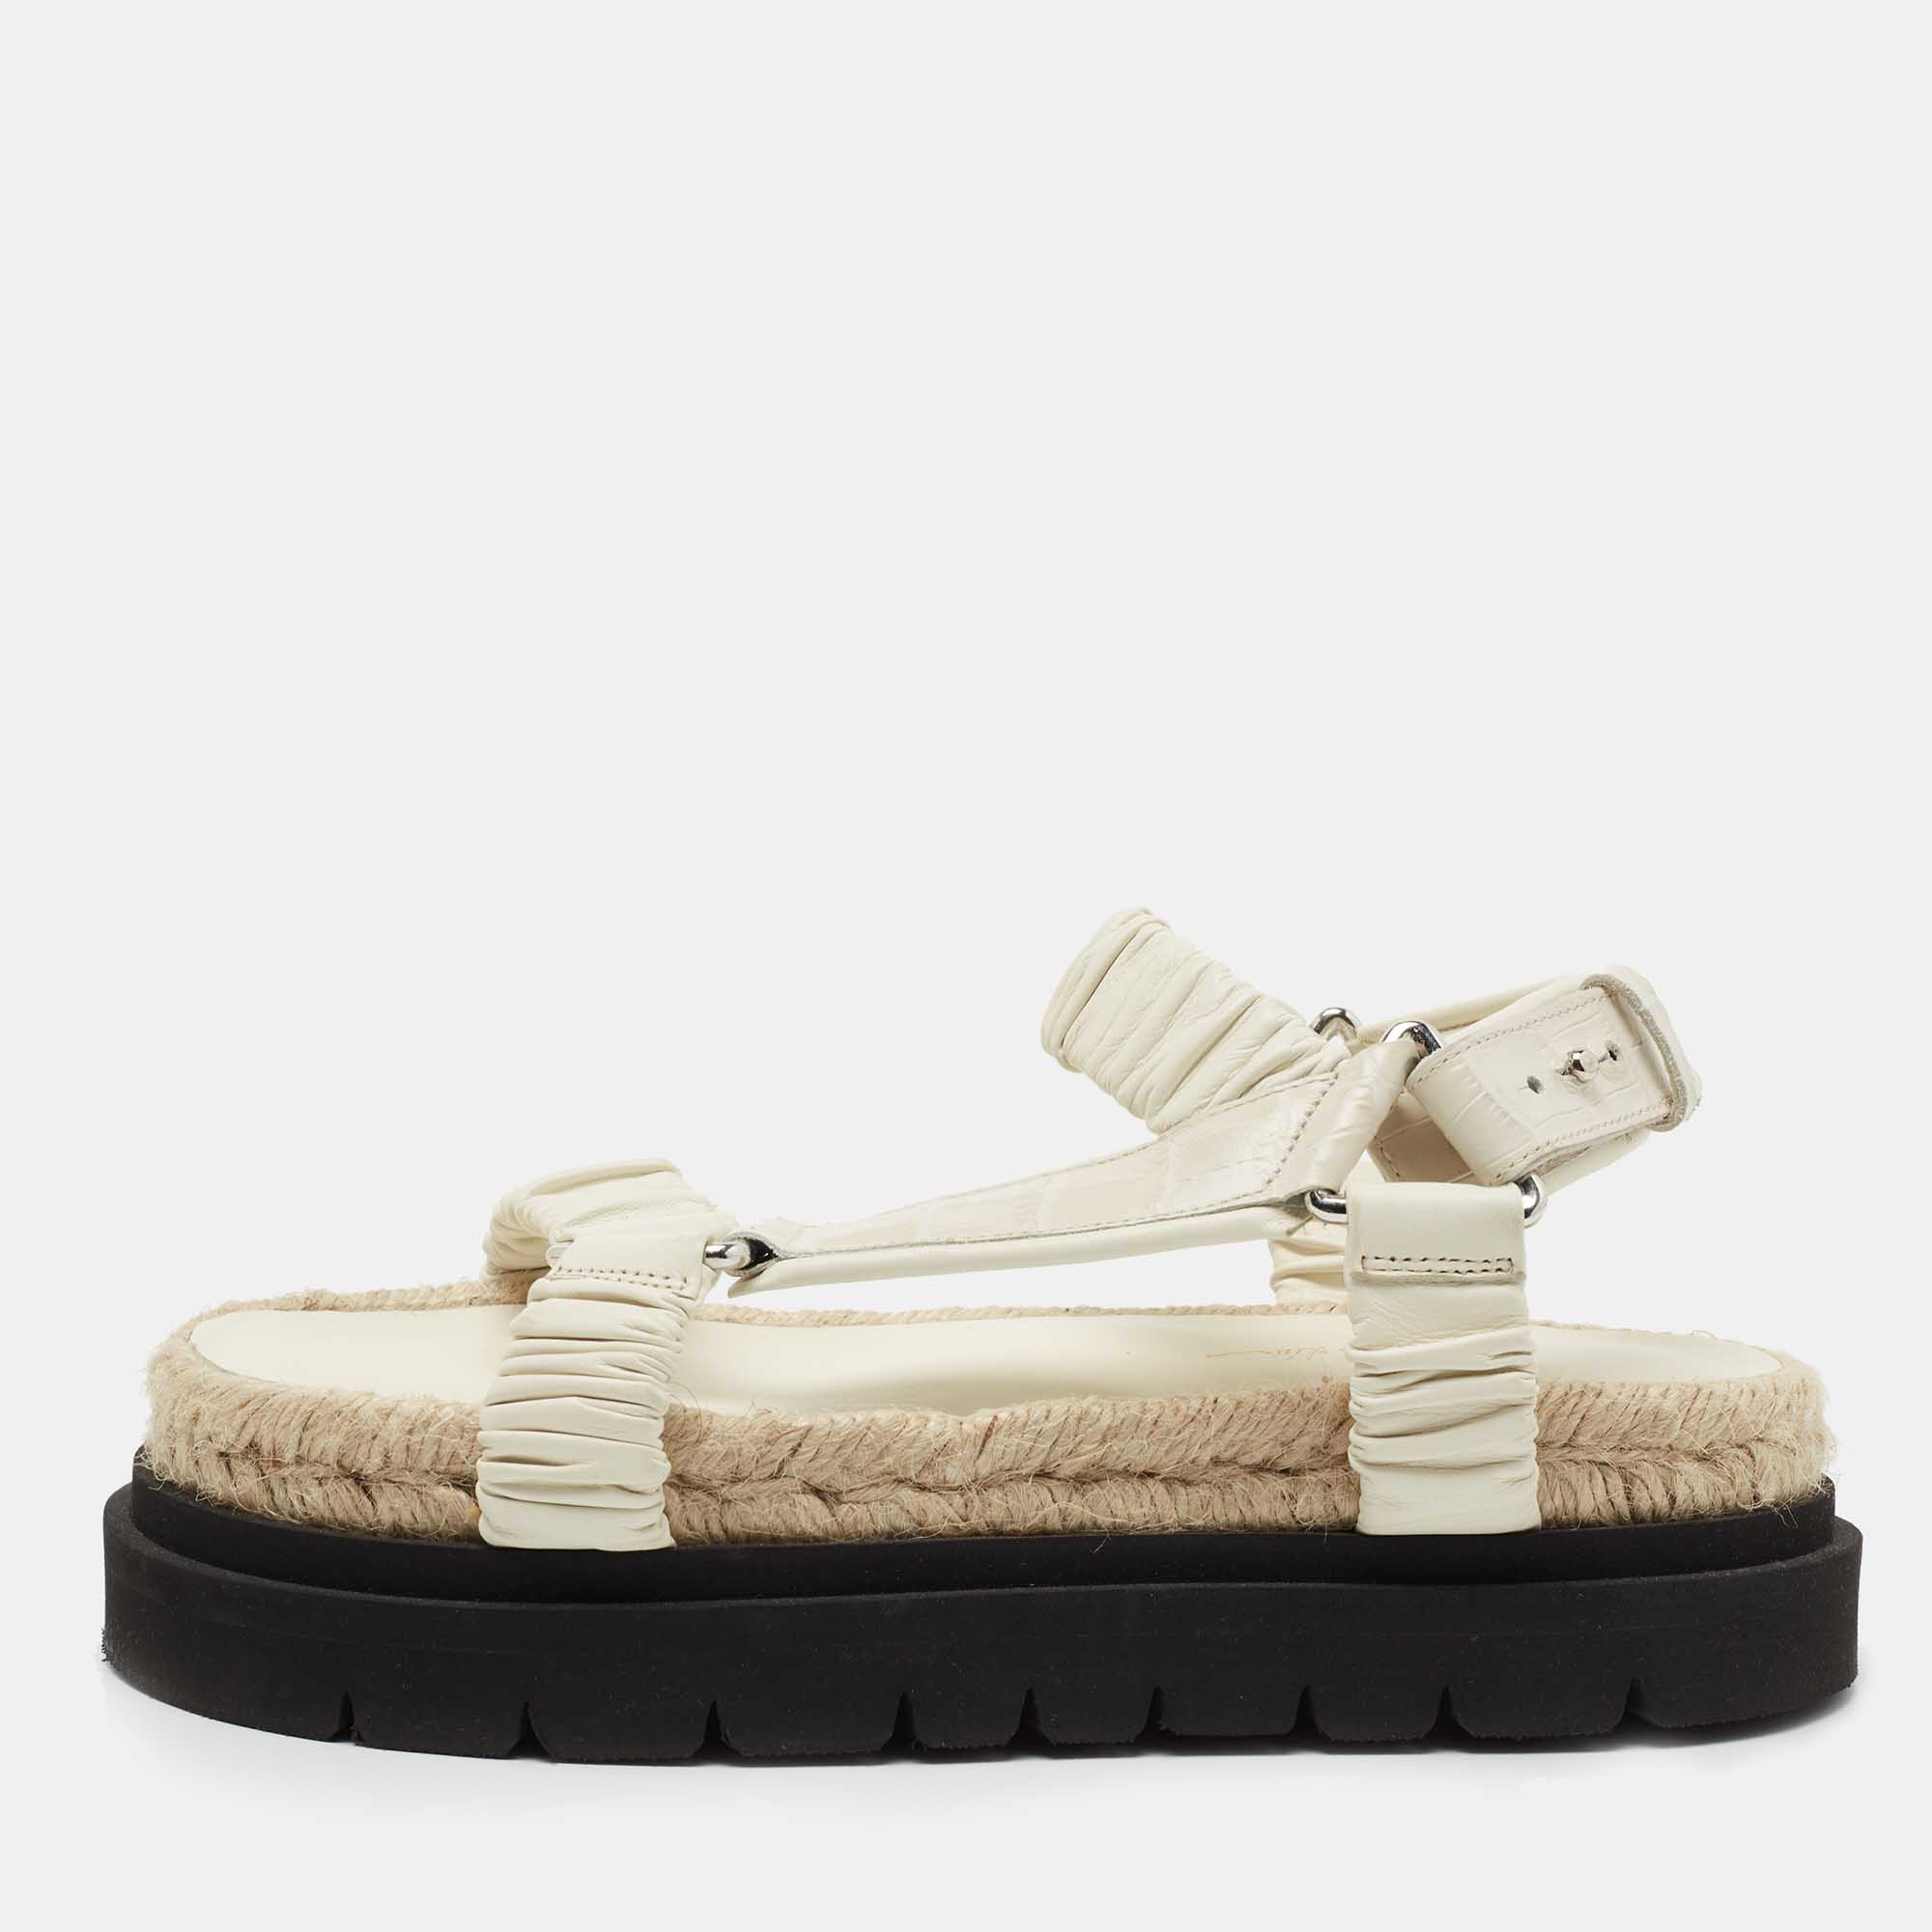 3.1 Philip Lim White Croc Embossed and Leather Espadrille Sandals Size ...